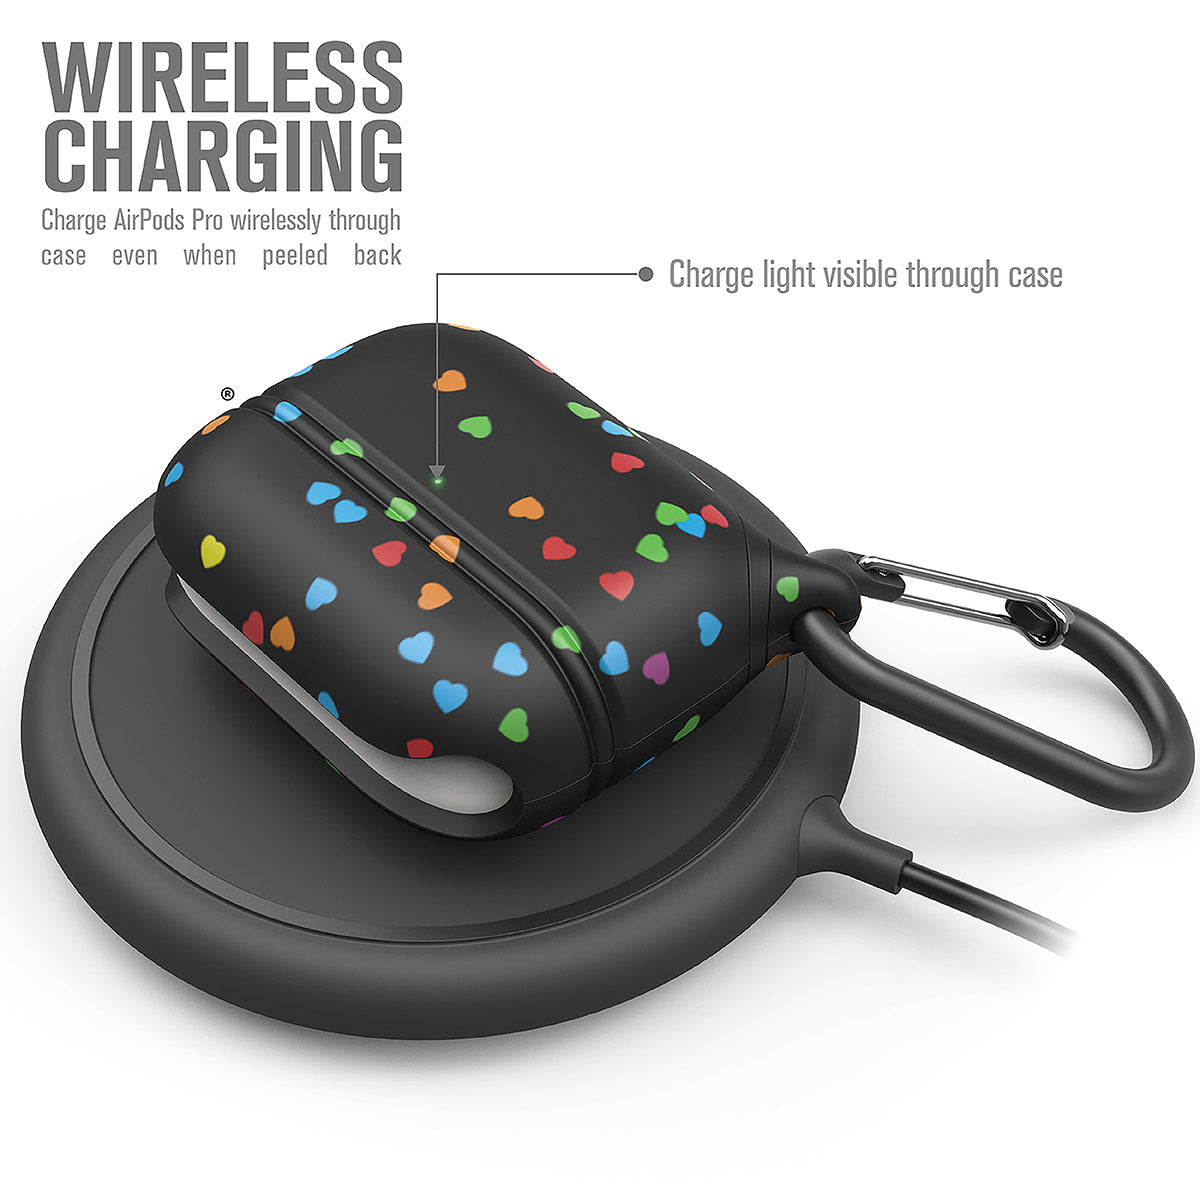 CATAPLAPDPROHTB | catalyst airpods pro gen 2 1 waterproof case carabiner special edition black with hearts on top of a wireless charger text reads wireless charging charge airpods pro wirelessly through case even when peeled back charge light visible through case